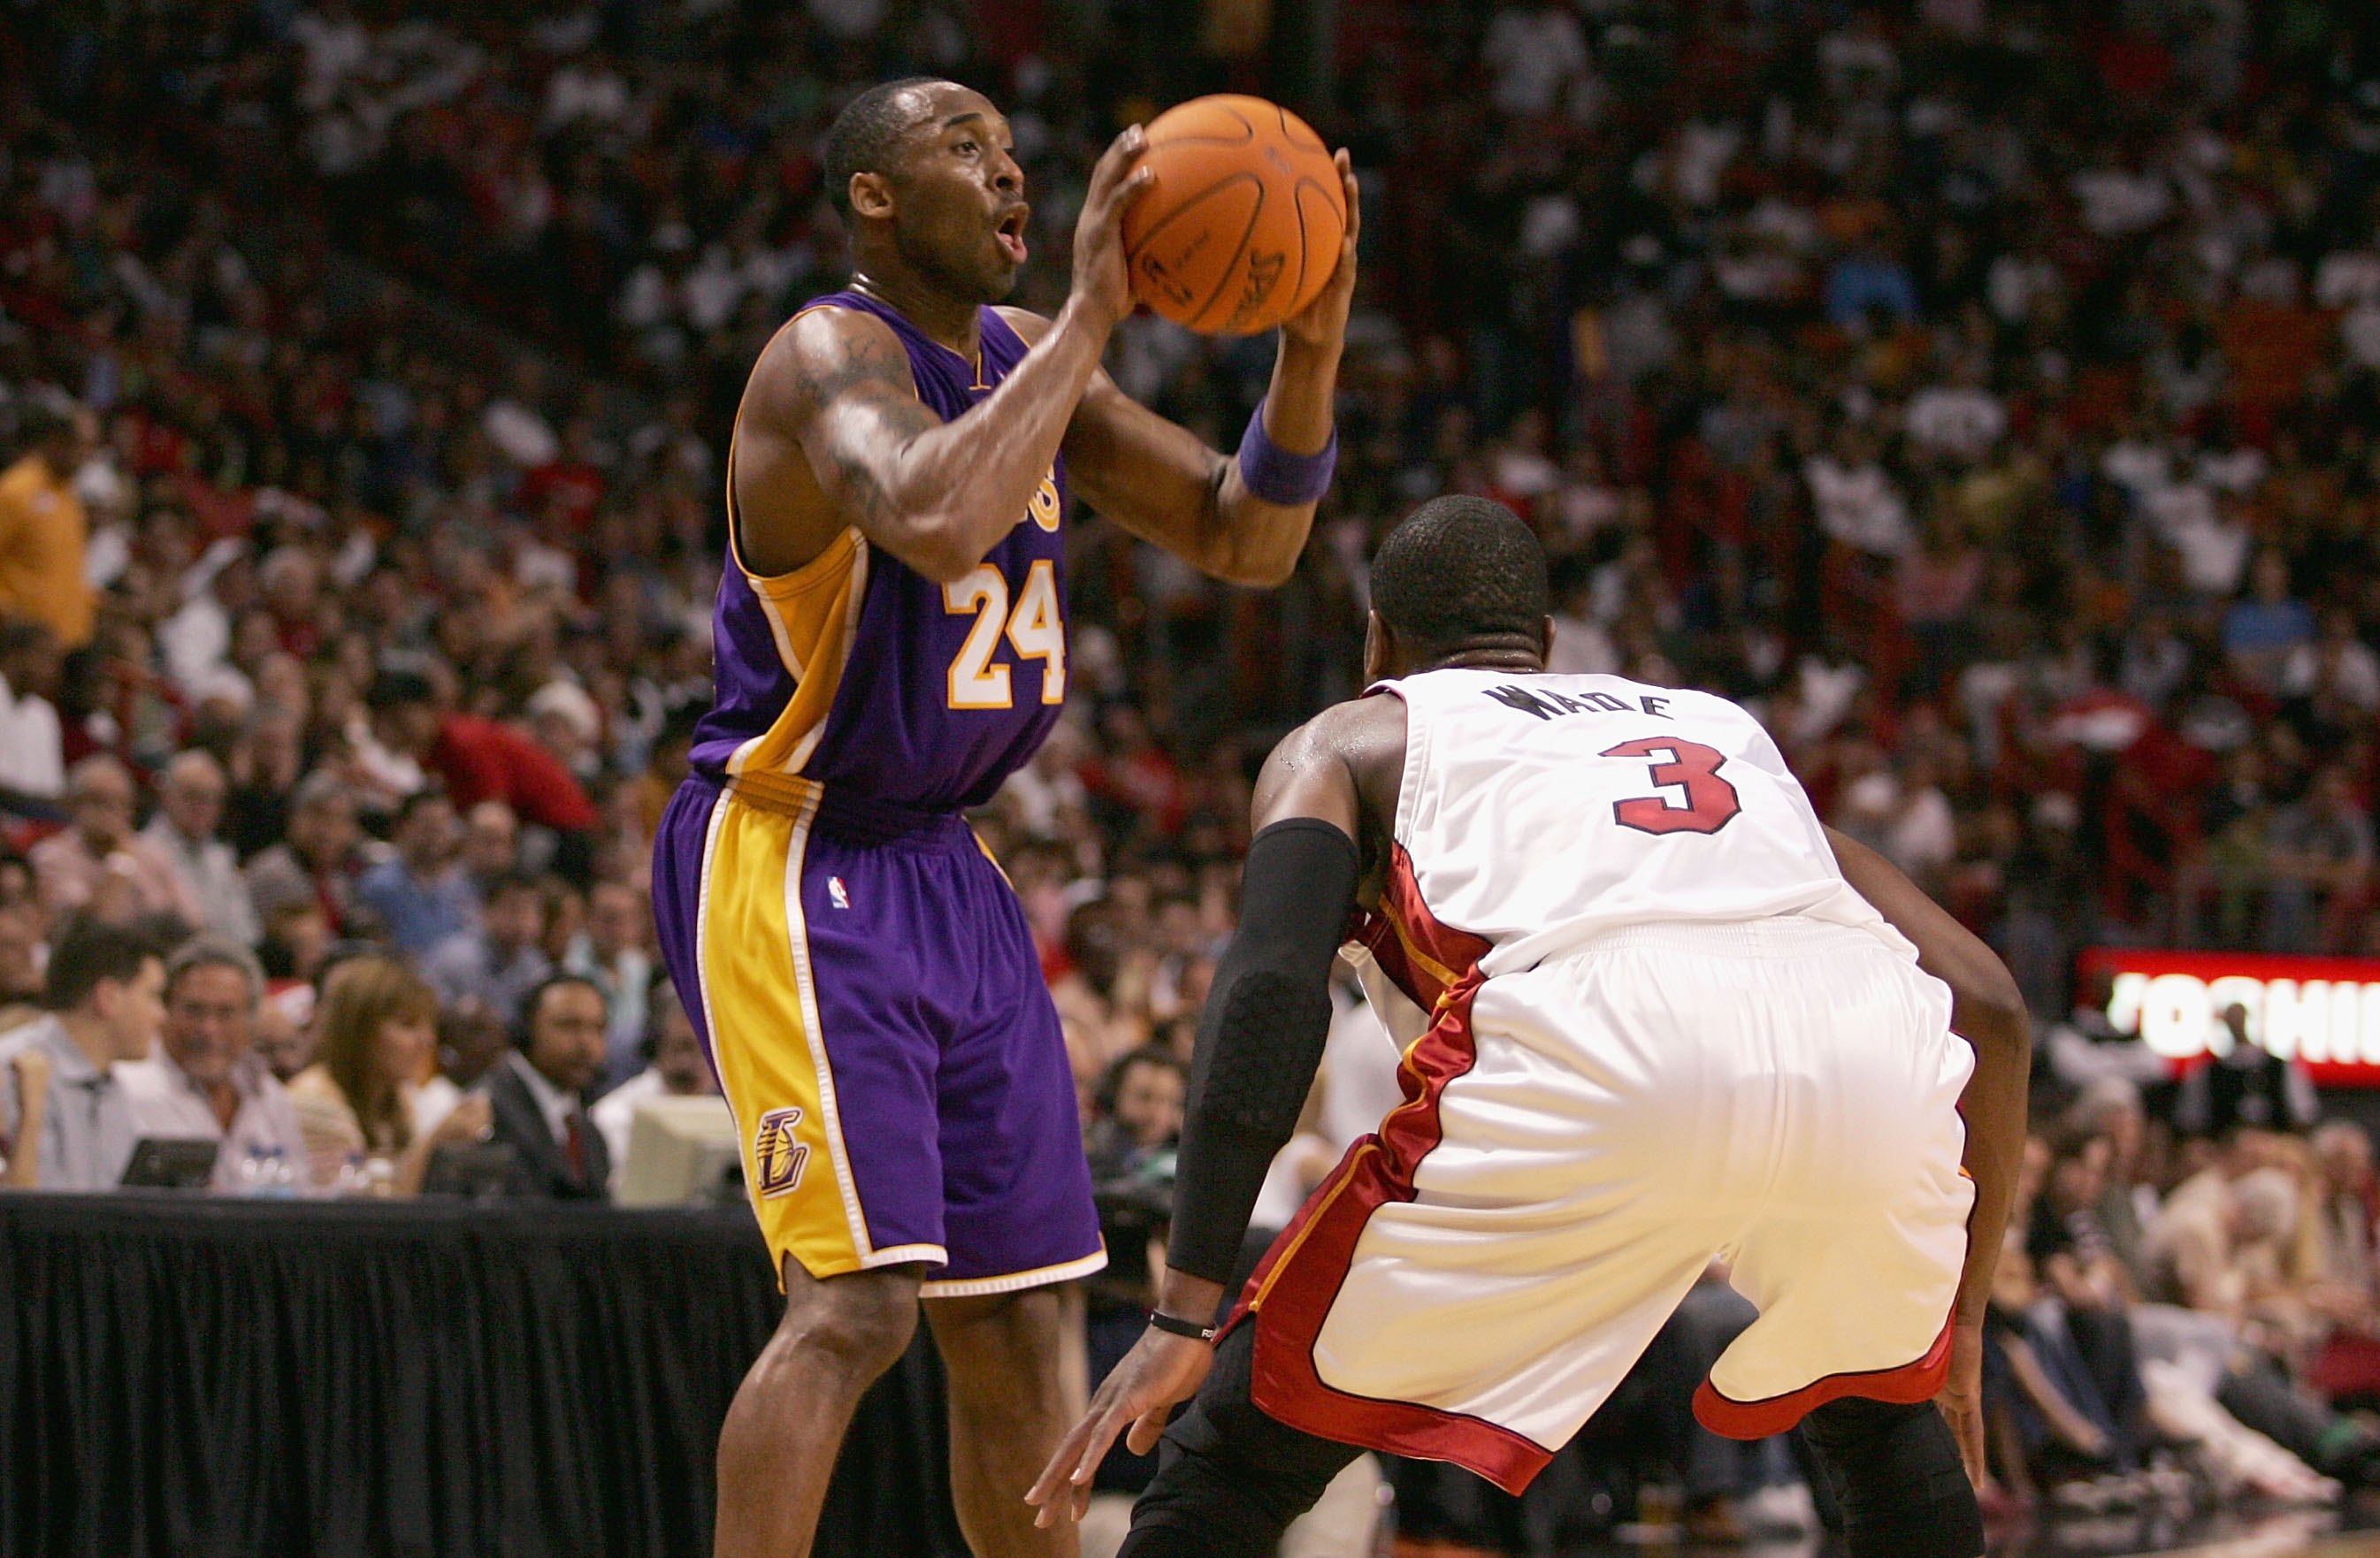 MIAMI - DECEMBER 25:  Kobe Bryant #24 of the Los Angeles Lakers looks for an open pass over Dwyane Wade #3 of the Miami Heat during the game on December 25, 2006 at the American Airlines Arena in Miami, Florida.  The Heat won 101-85.  NOTE TO USER: User e